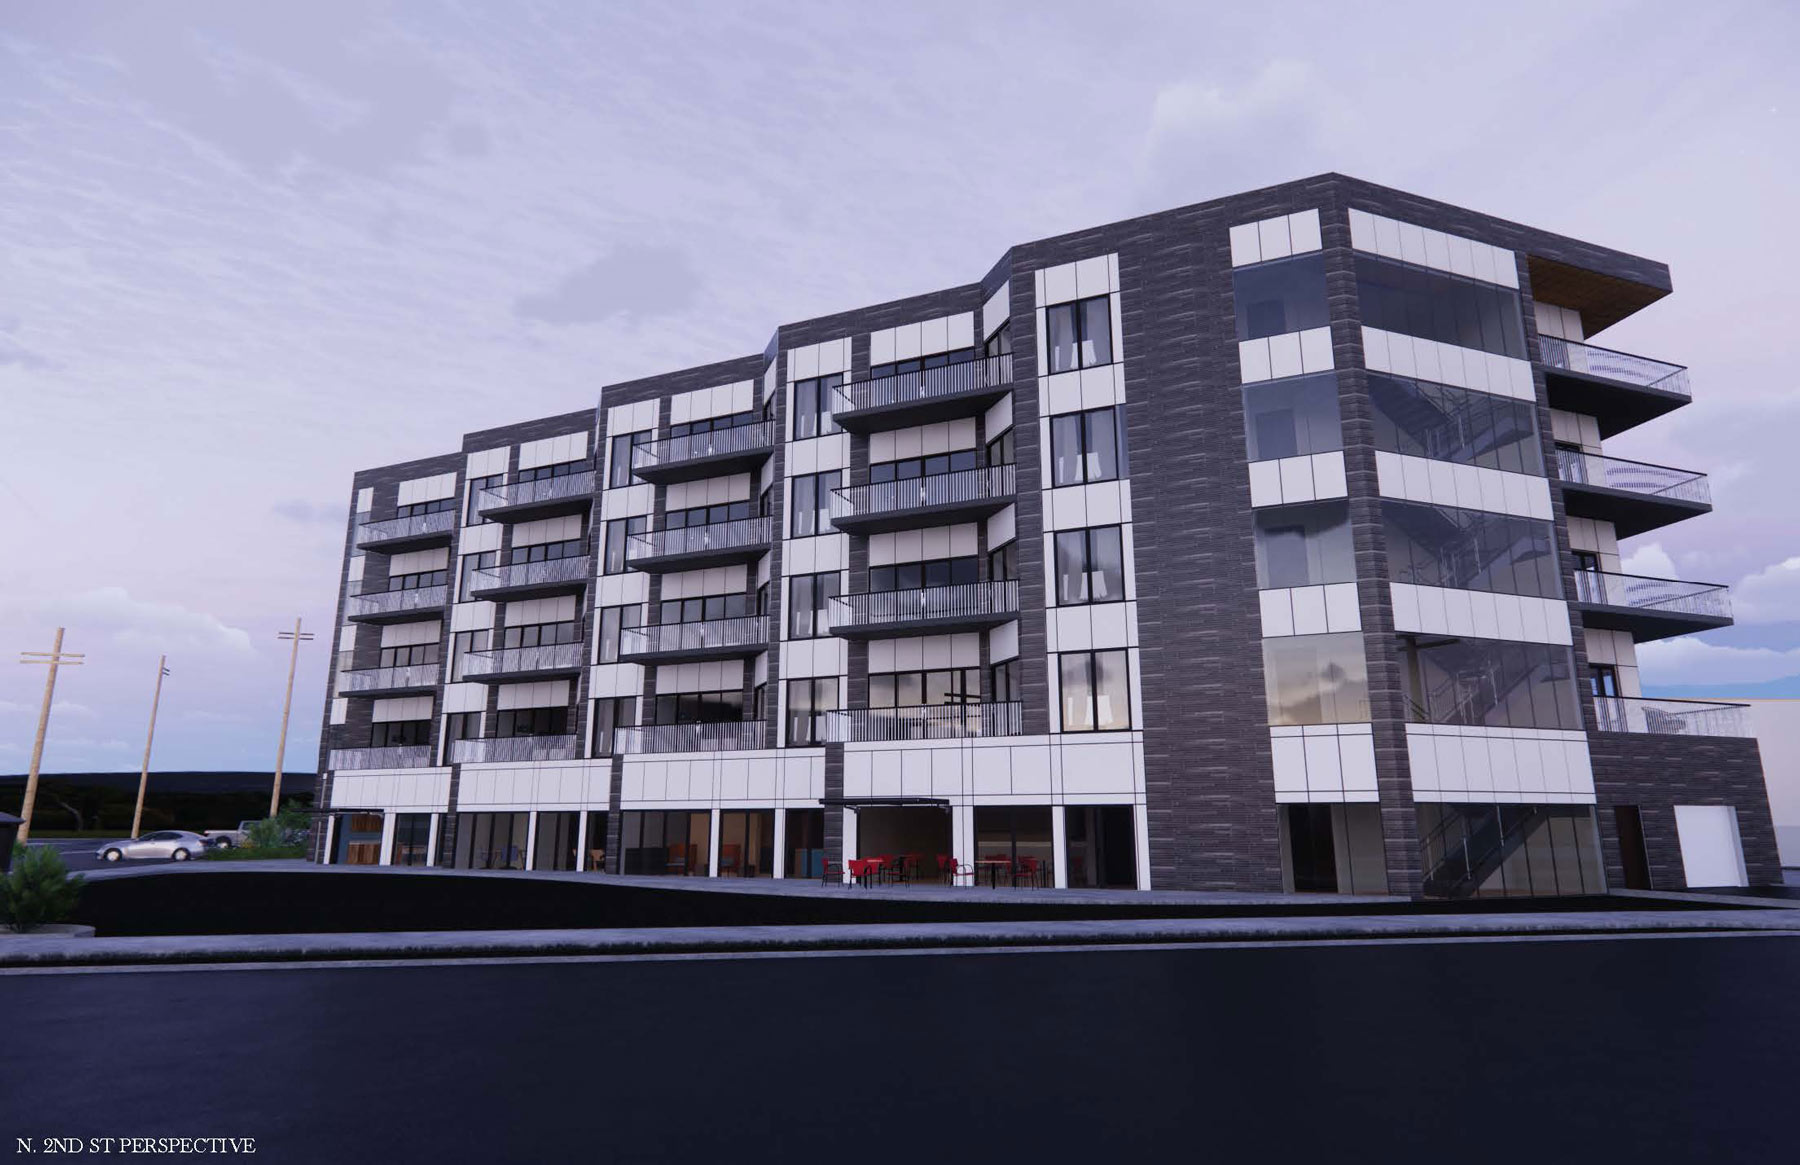 exterior rendering by Emily Hammons showing outside of multi-story building from parking lot - front